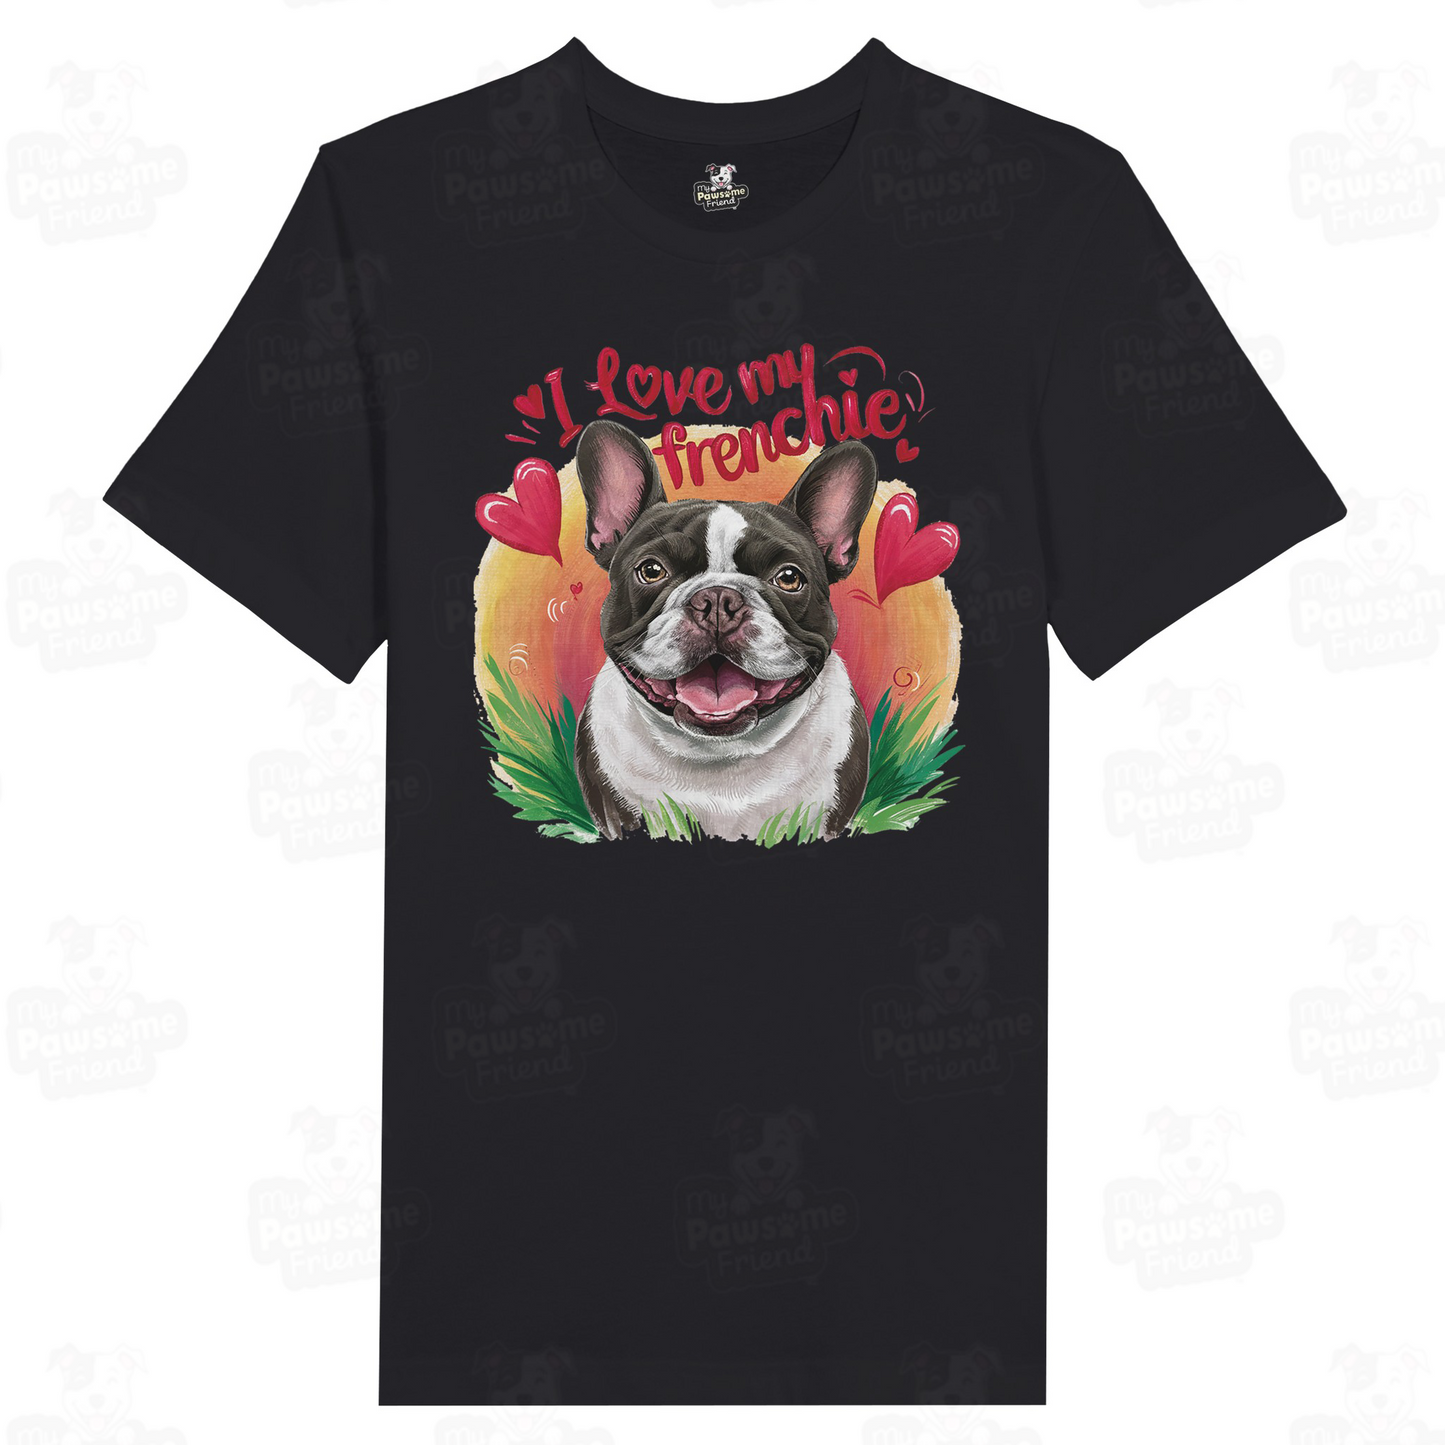 An unisex t shirt with a cute design featuring a french bulldog smiling surrounded by heart designs, and the phrase "I love my Frenchie". The color of the unisex t shirt is black